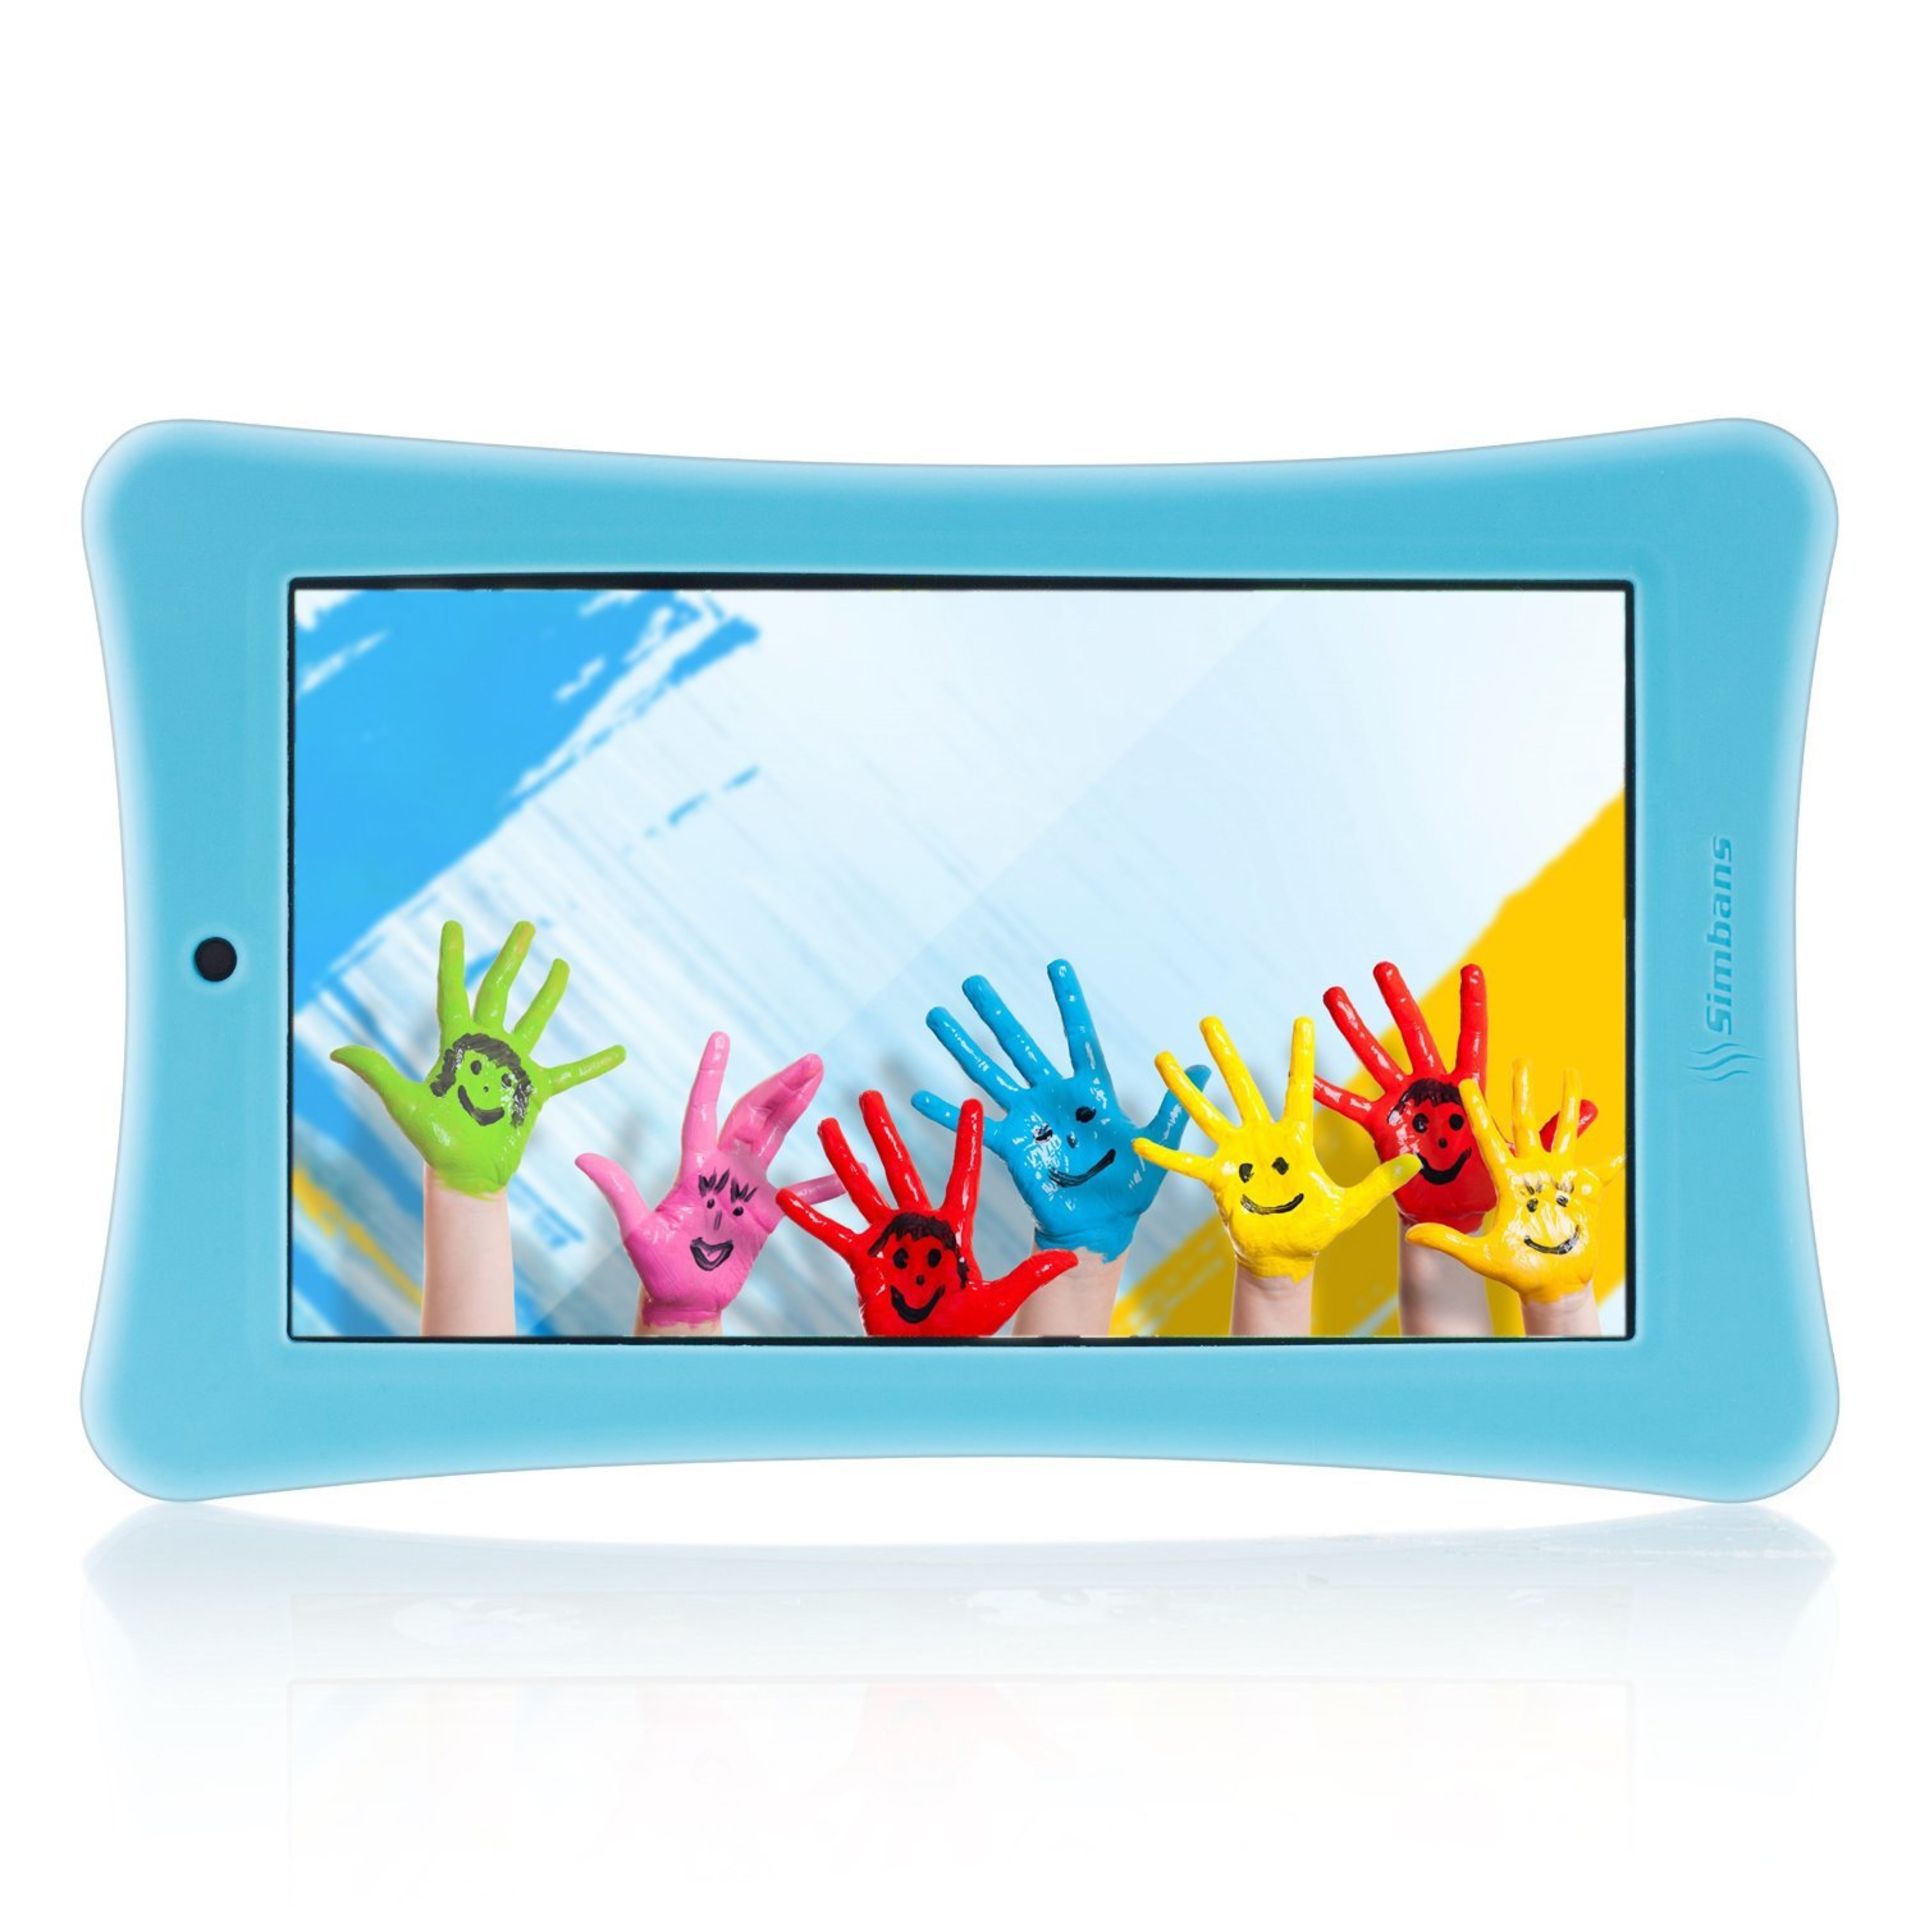 V *TRADE QTY* Brand New Funlet Blue 7 inch Tablet with Protective Case - Tablet sleeve - IPS